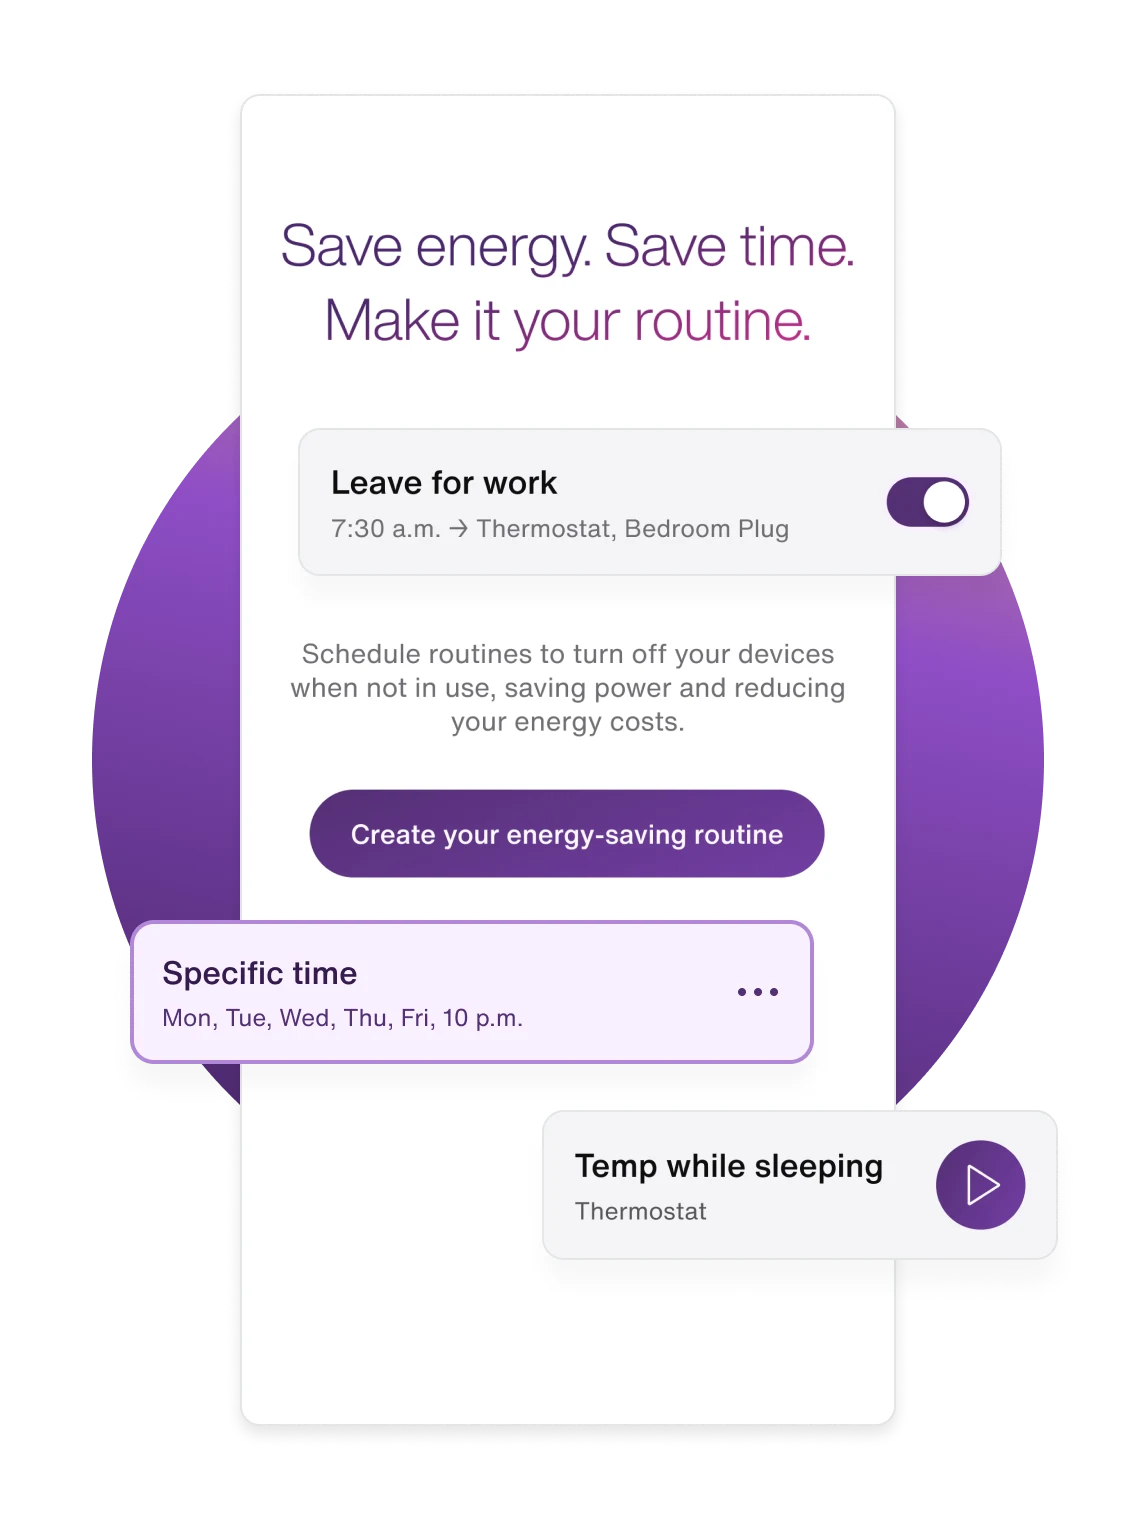 SmartEnergy features of the TELUS SmartHome+ app showing how to create a routine when you leave for work to adjust your thermostat and turn off your devices. The app reads: Save energy. Save time. Make it your routine. 